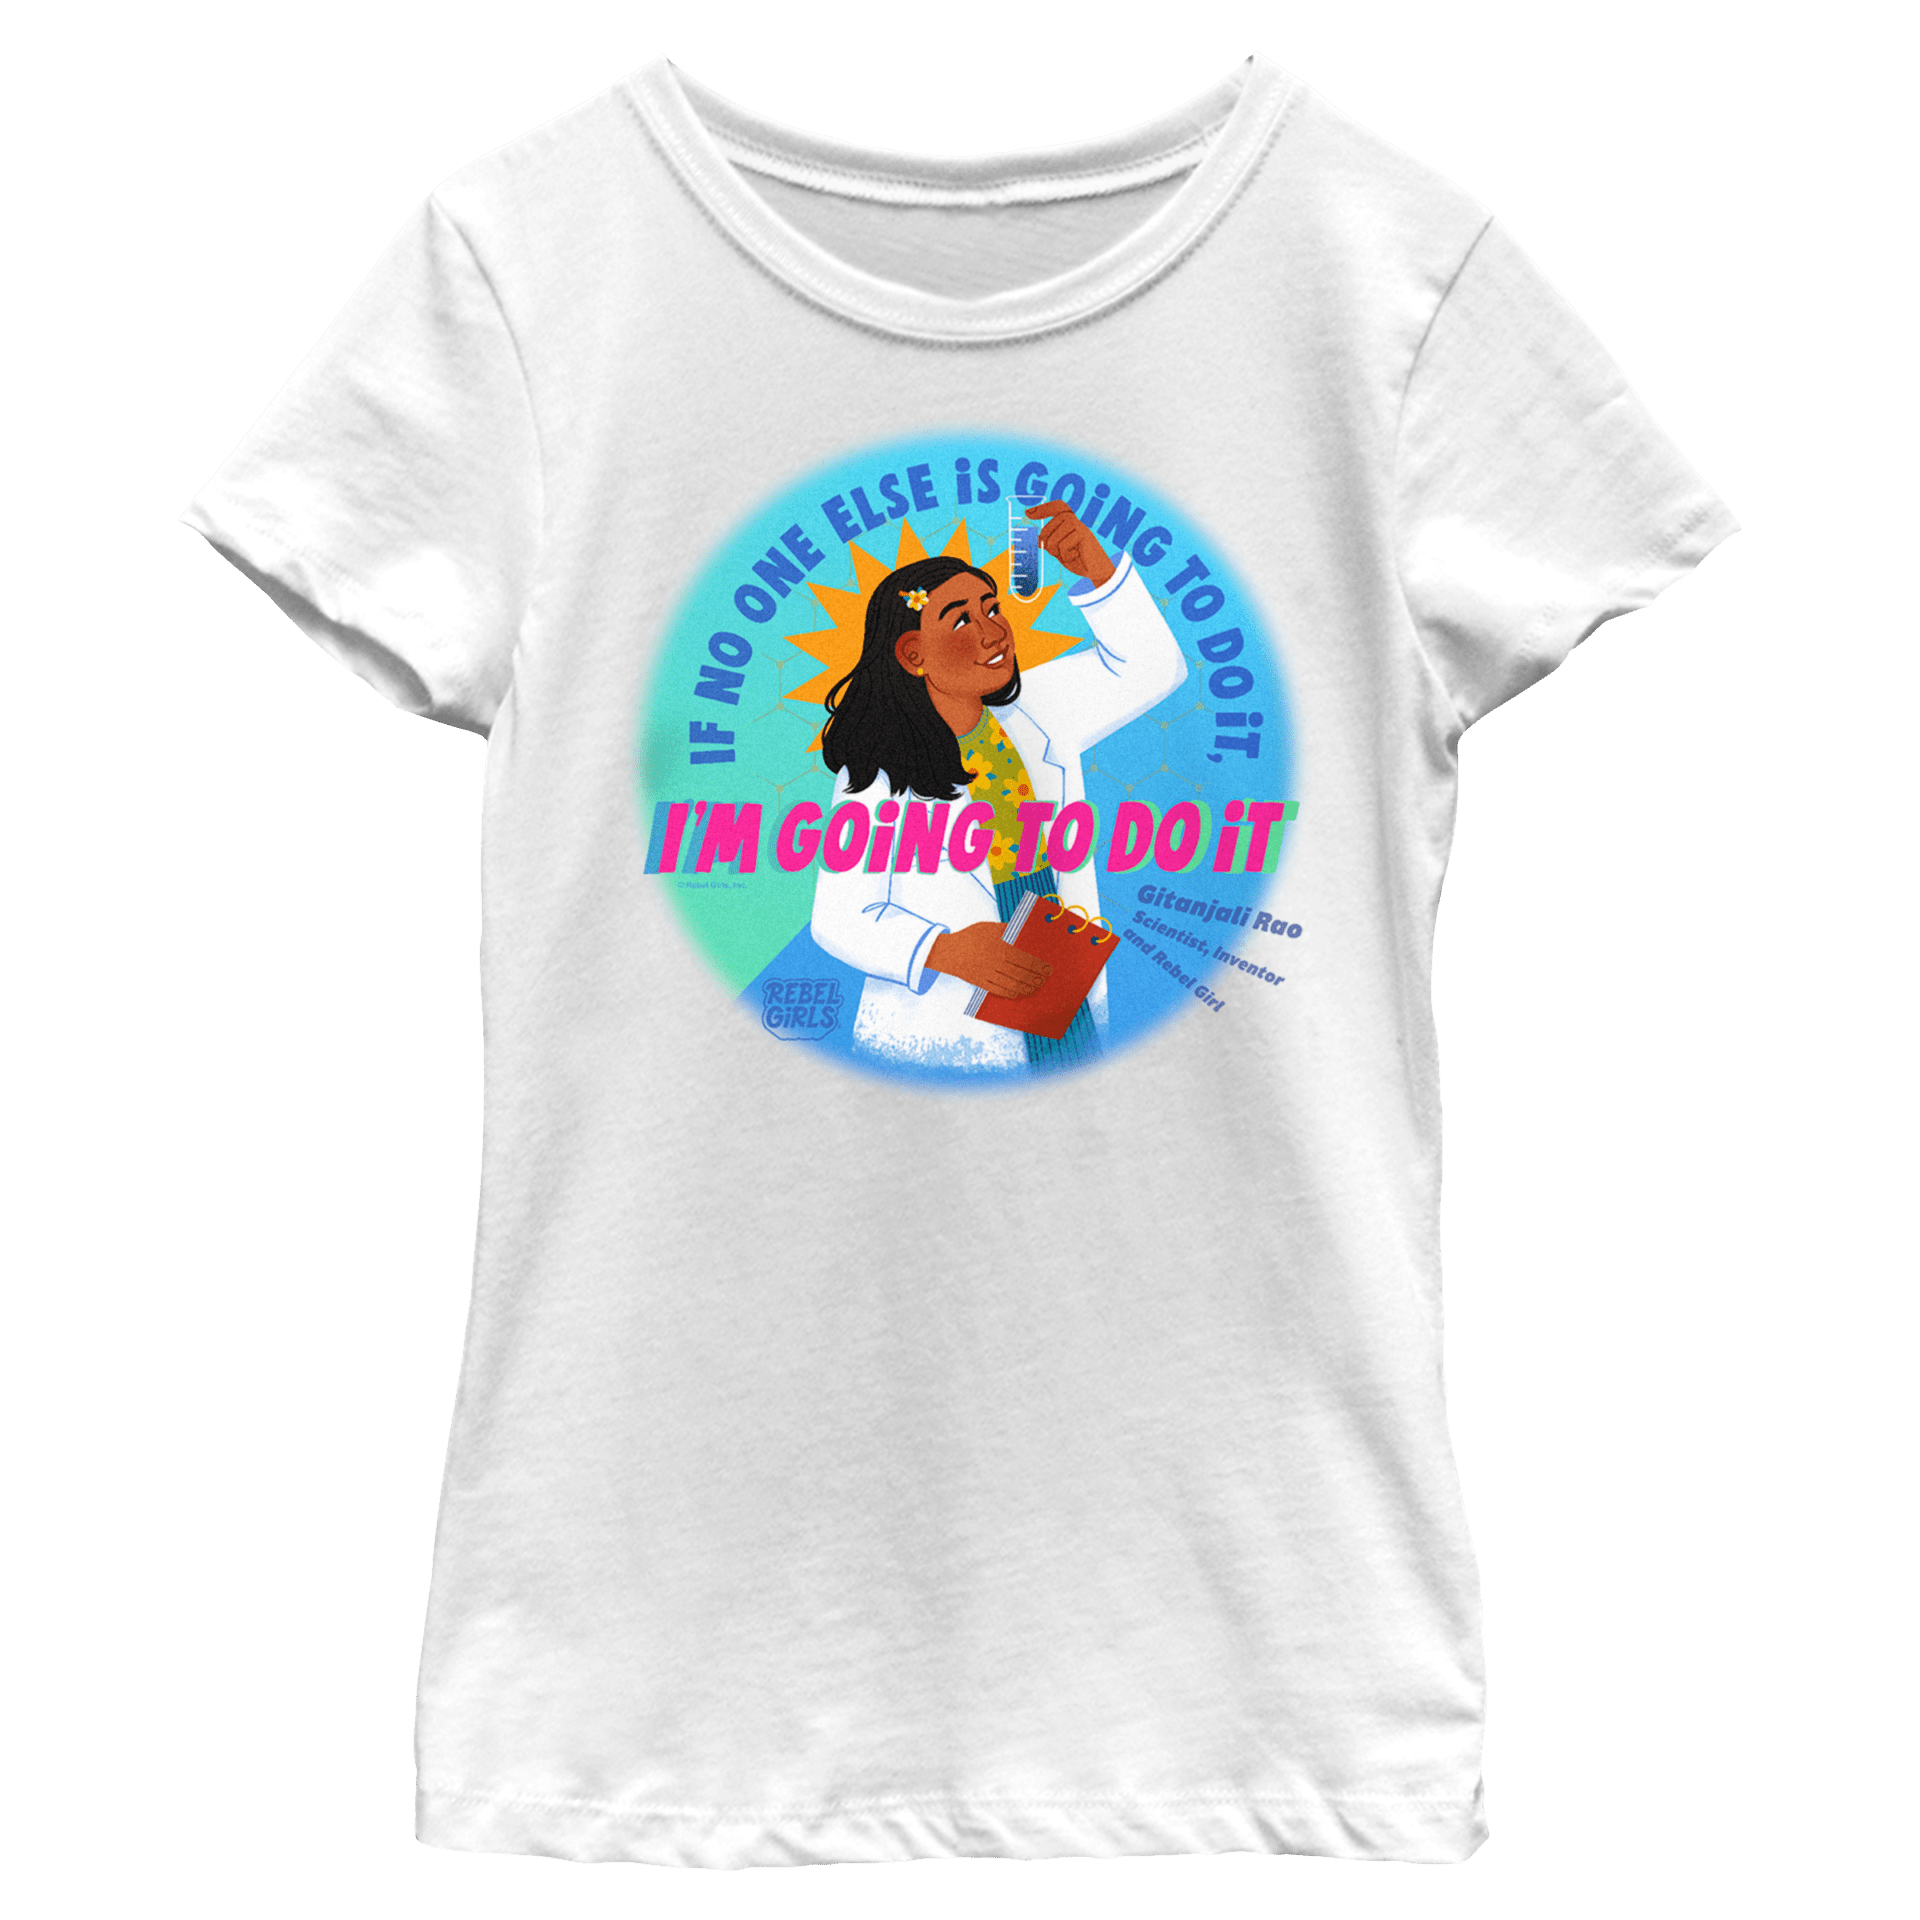 &#8220;Gitanjali Rao: I’m Going To Do It&#8221; Tees and Tops